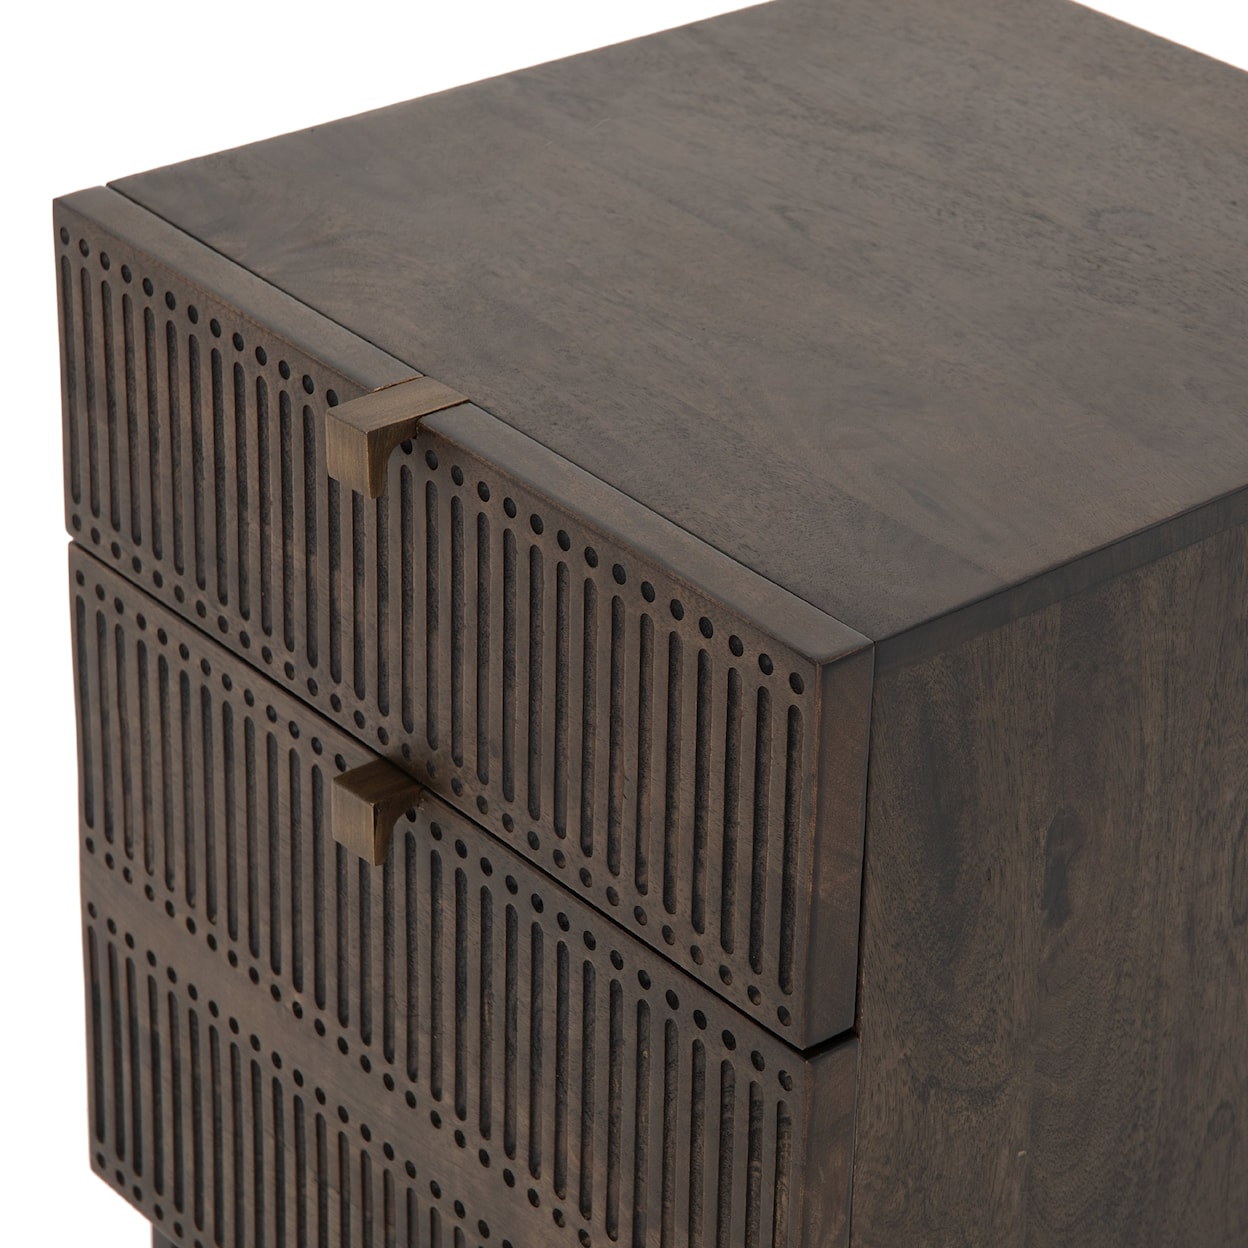 Four Hands Kelby Filing Cabinet